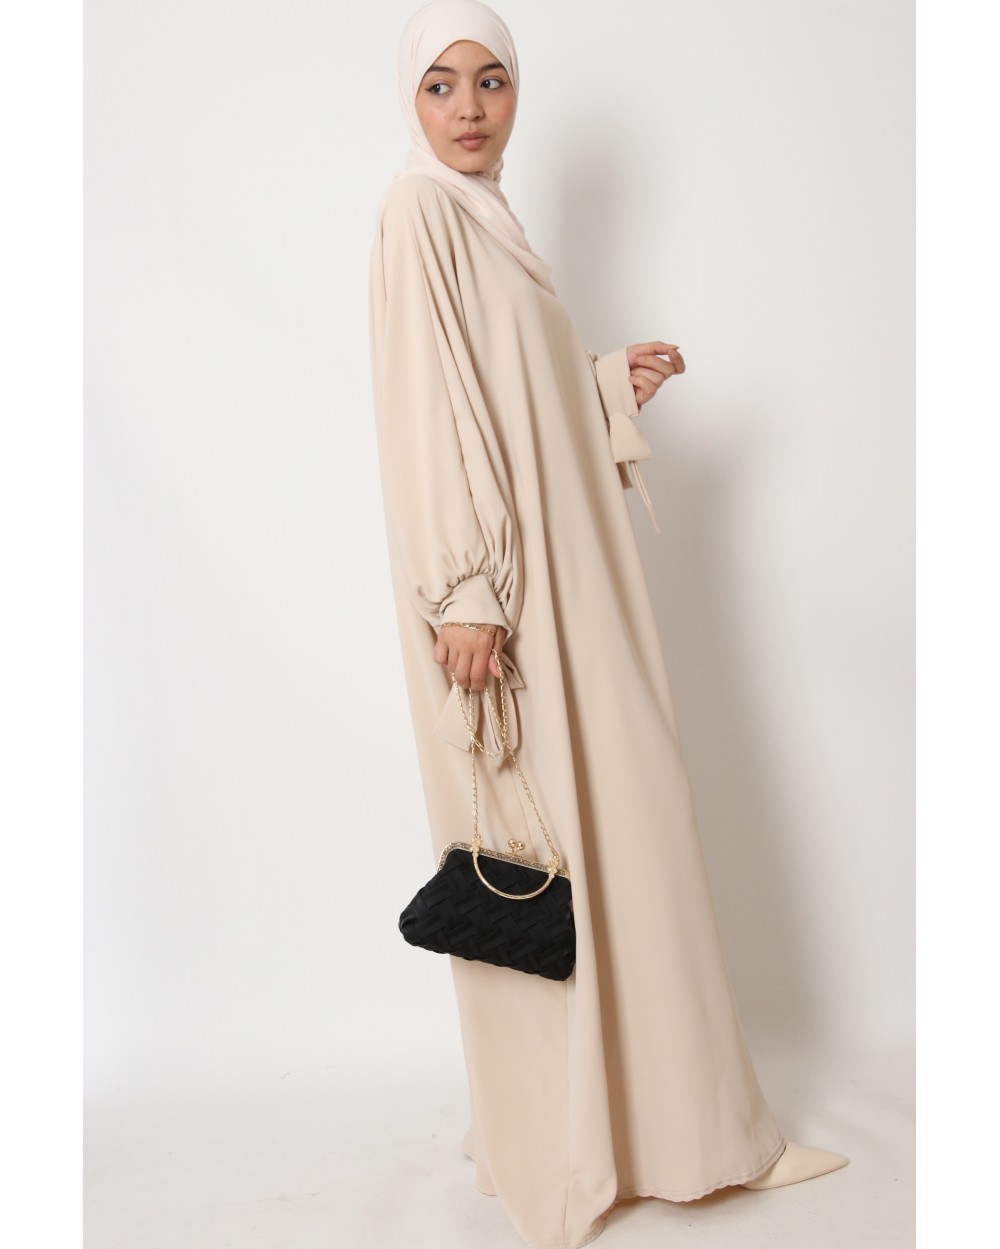 Abaya butterfly Amirah sleeves with bow